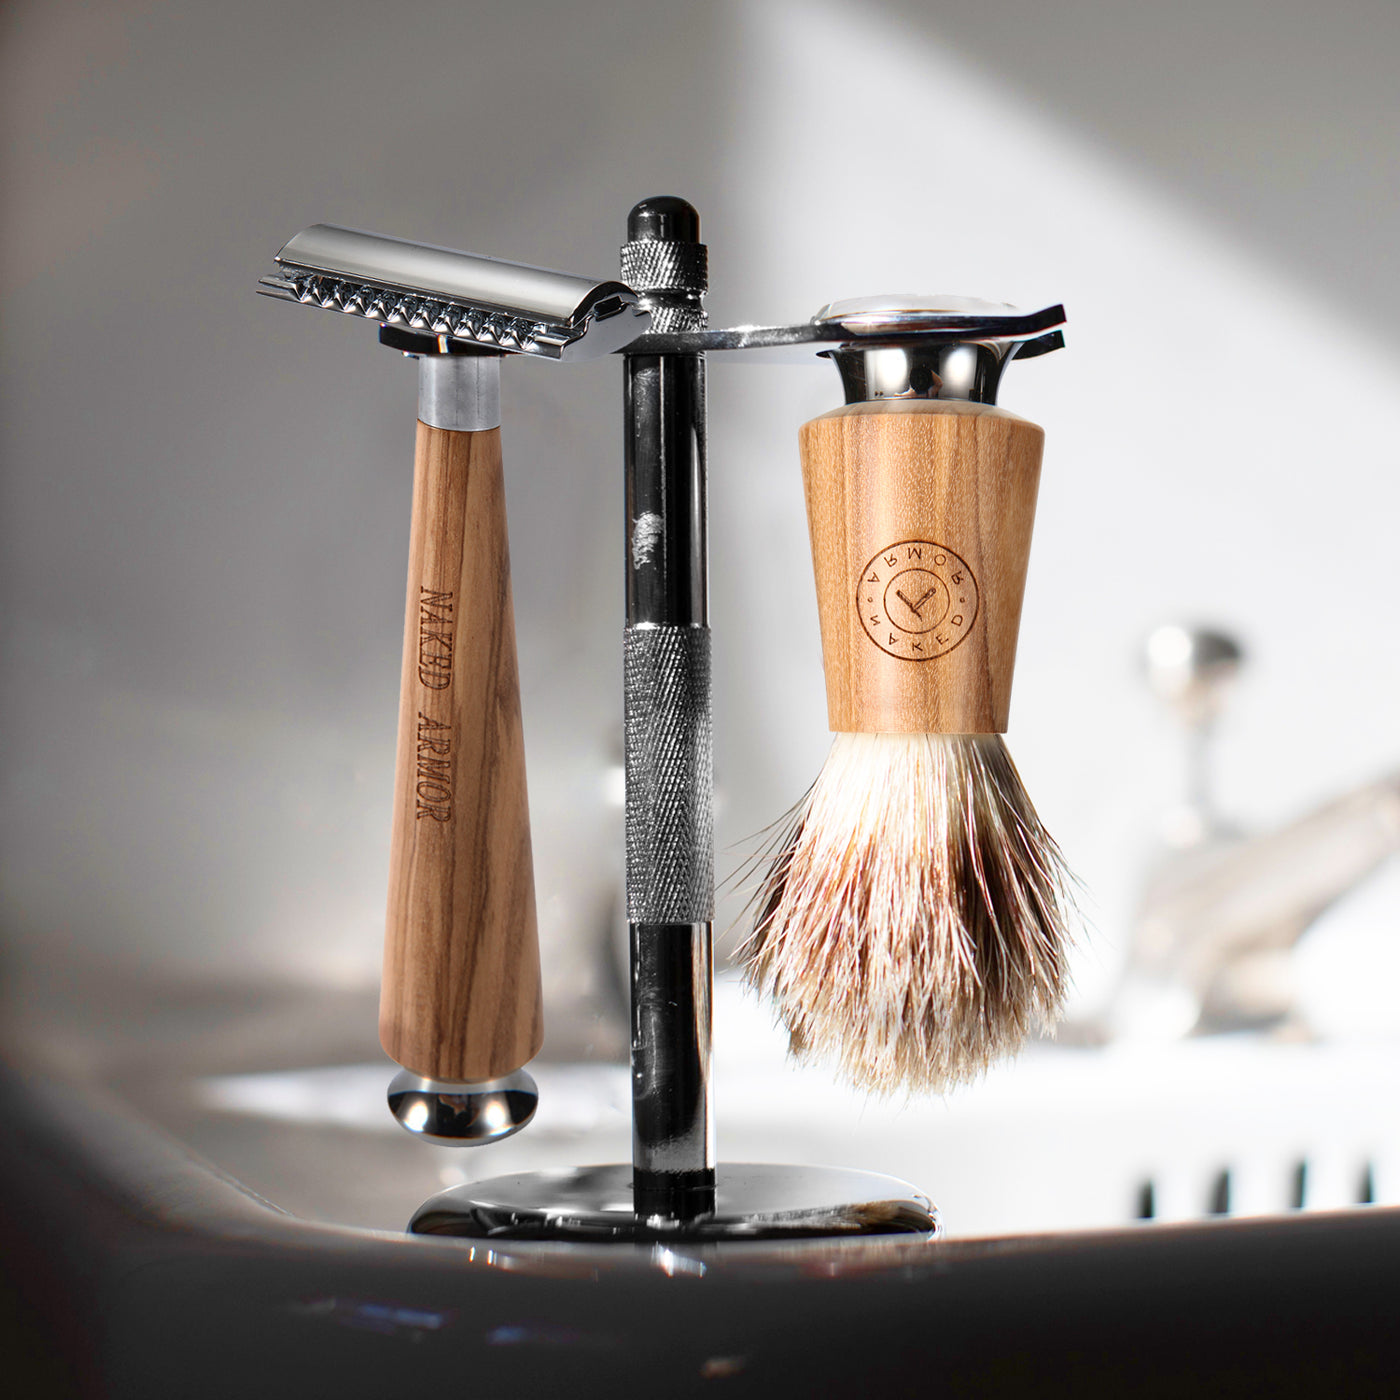  Gaswain Safety Razor and Stand Kit by Naked Armor sold by Naked Armor Razors